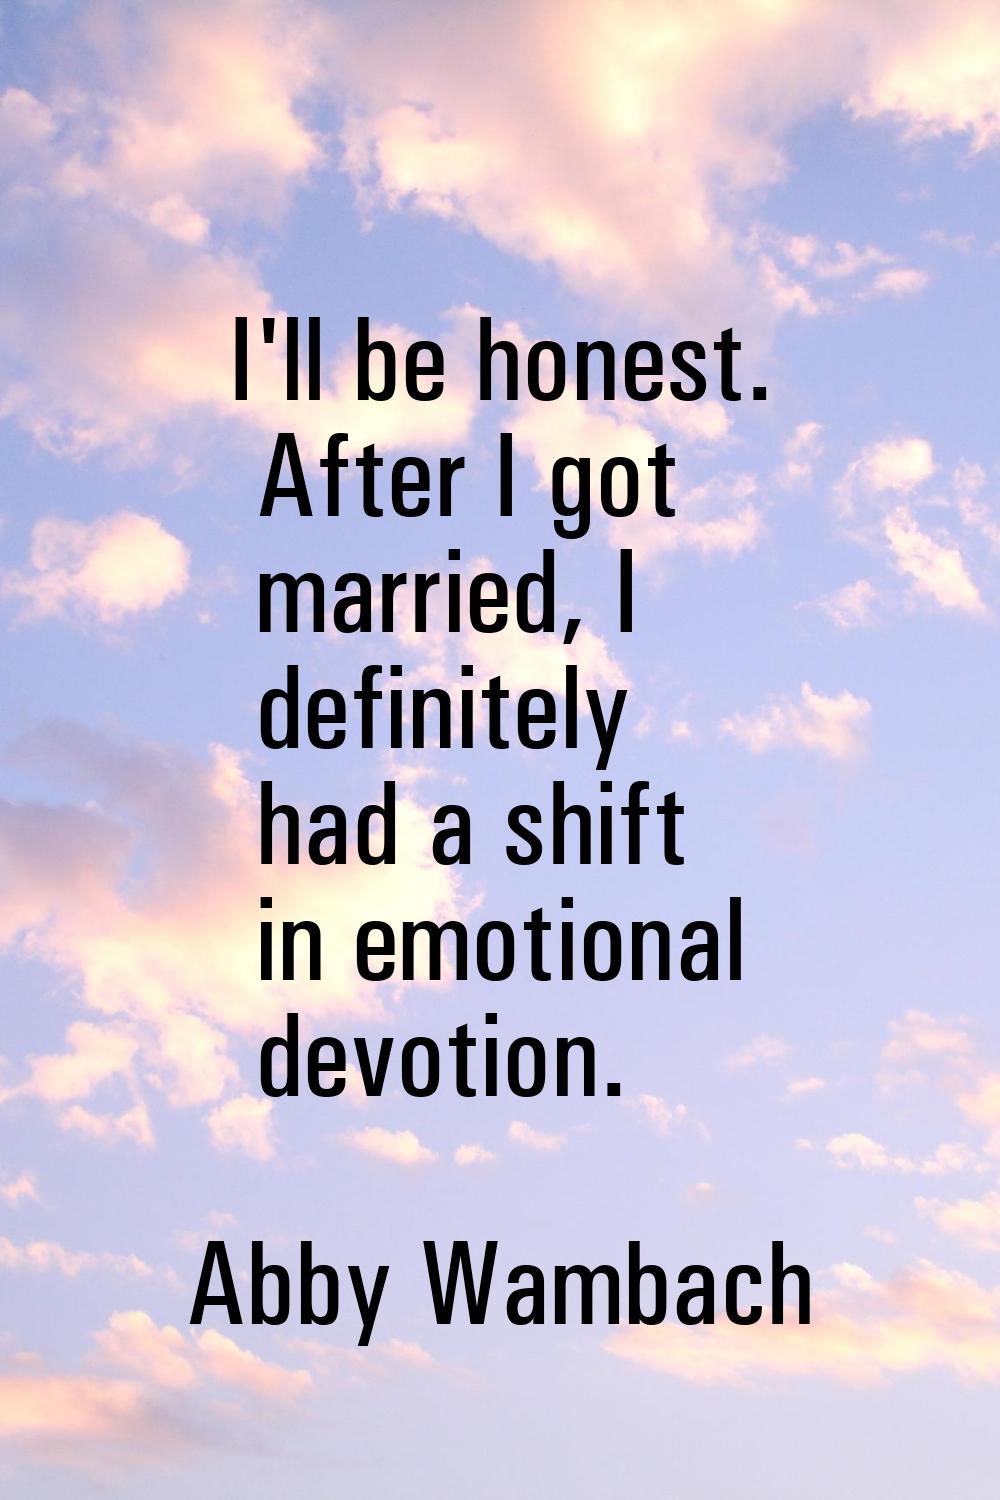 I'll be honest. After I got married, I definitely had a shift in emotional devotion.